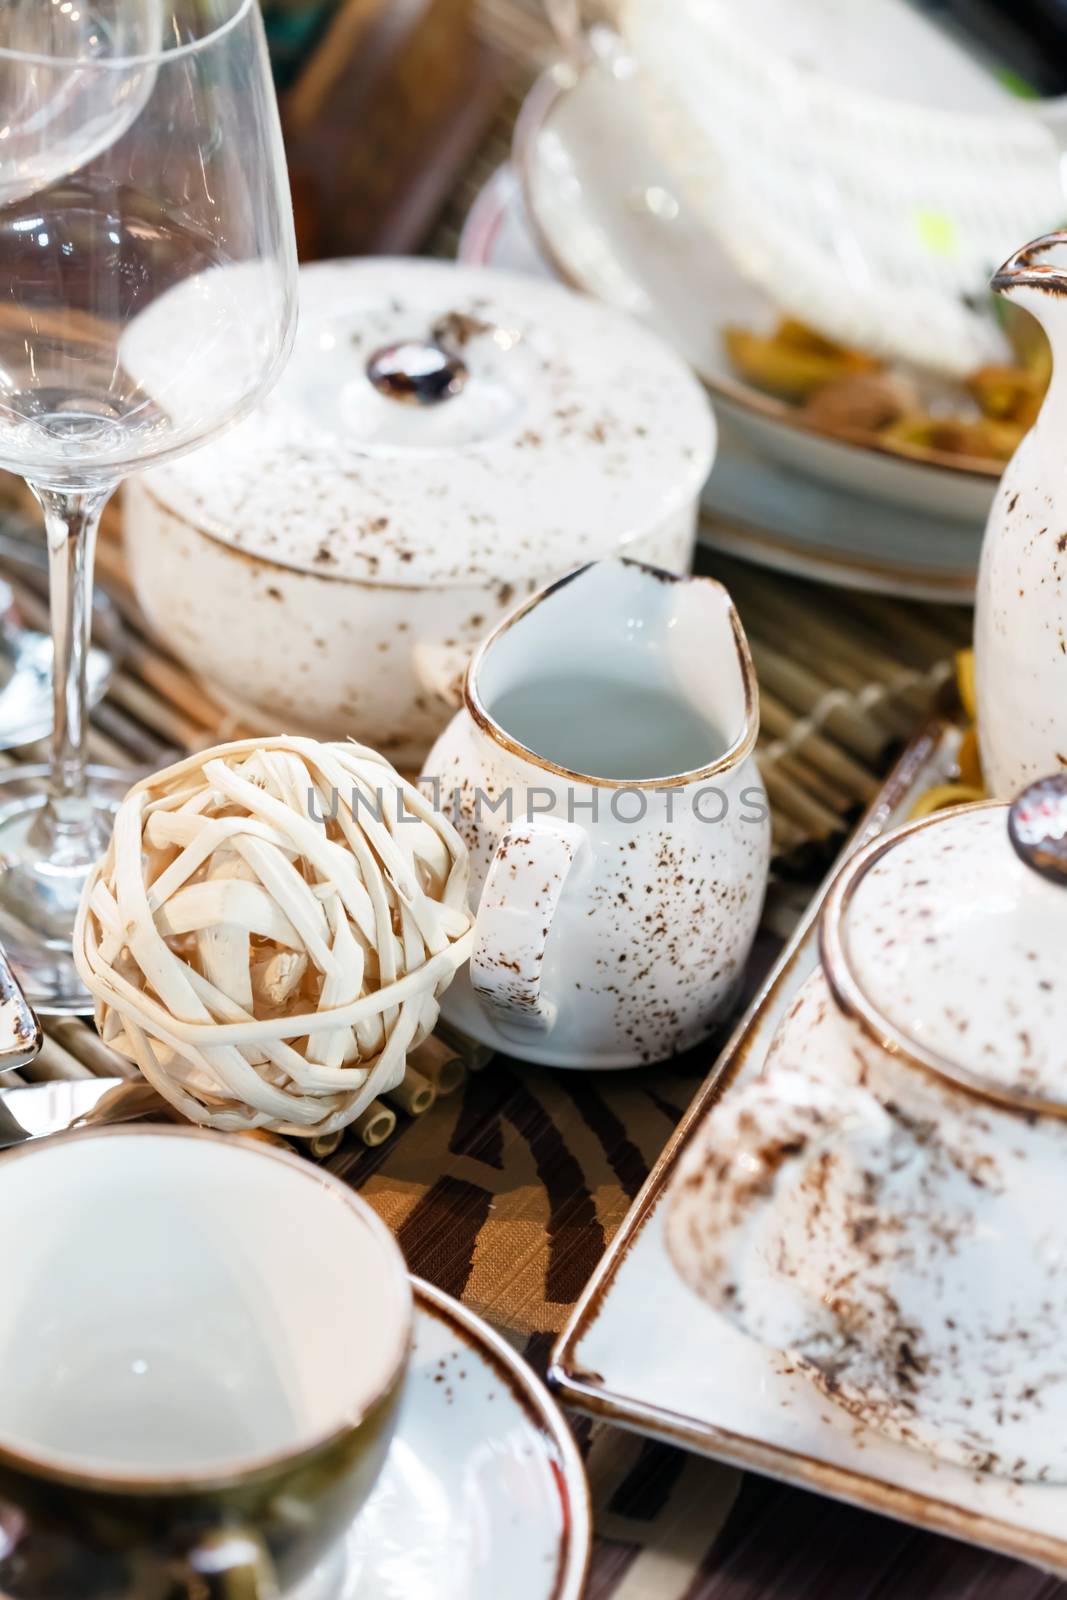 
Ceramic tableware on the table by shebeko